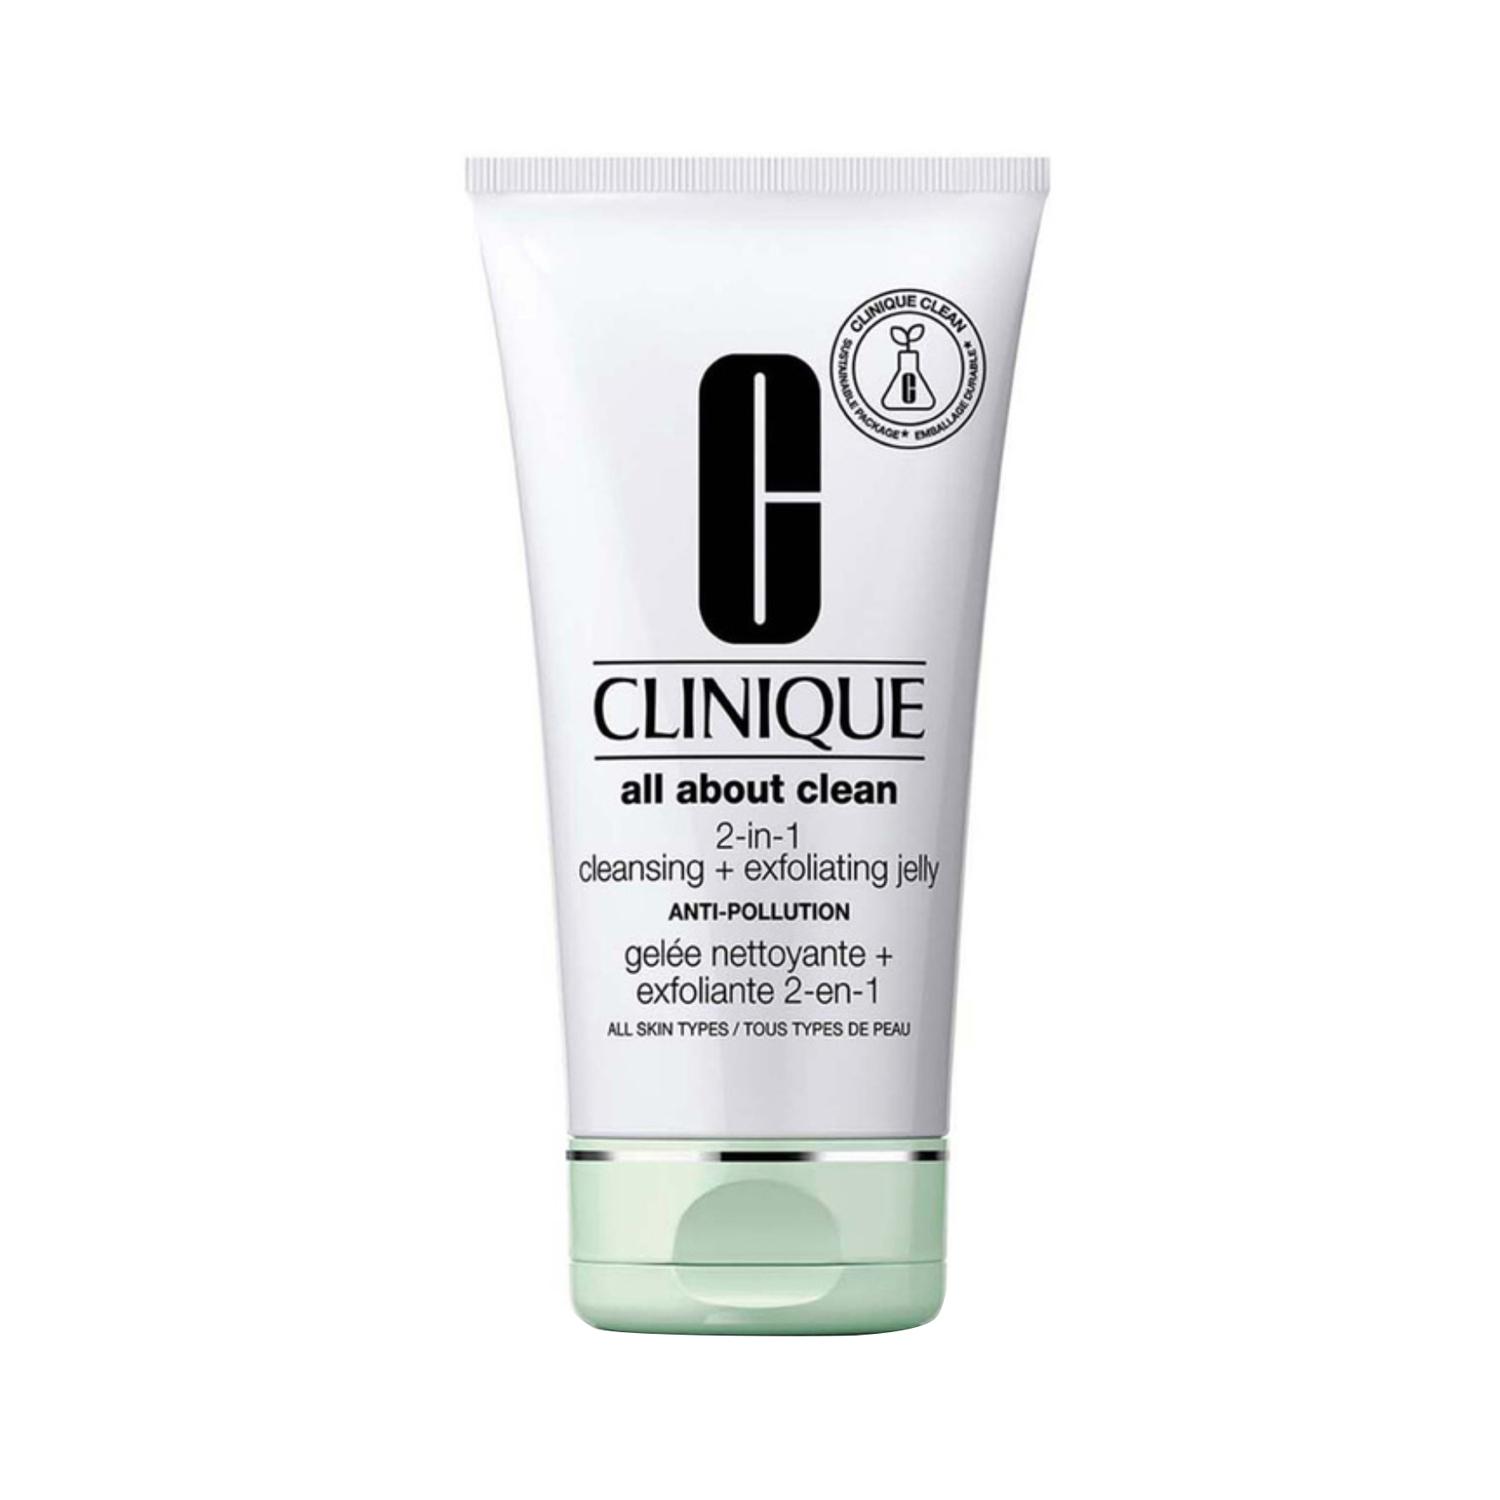 clinique all about clean anti-pollution 2-in-1 cleansing + exfoliating jelly (150ml)